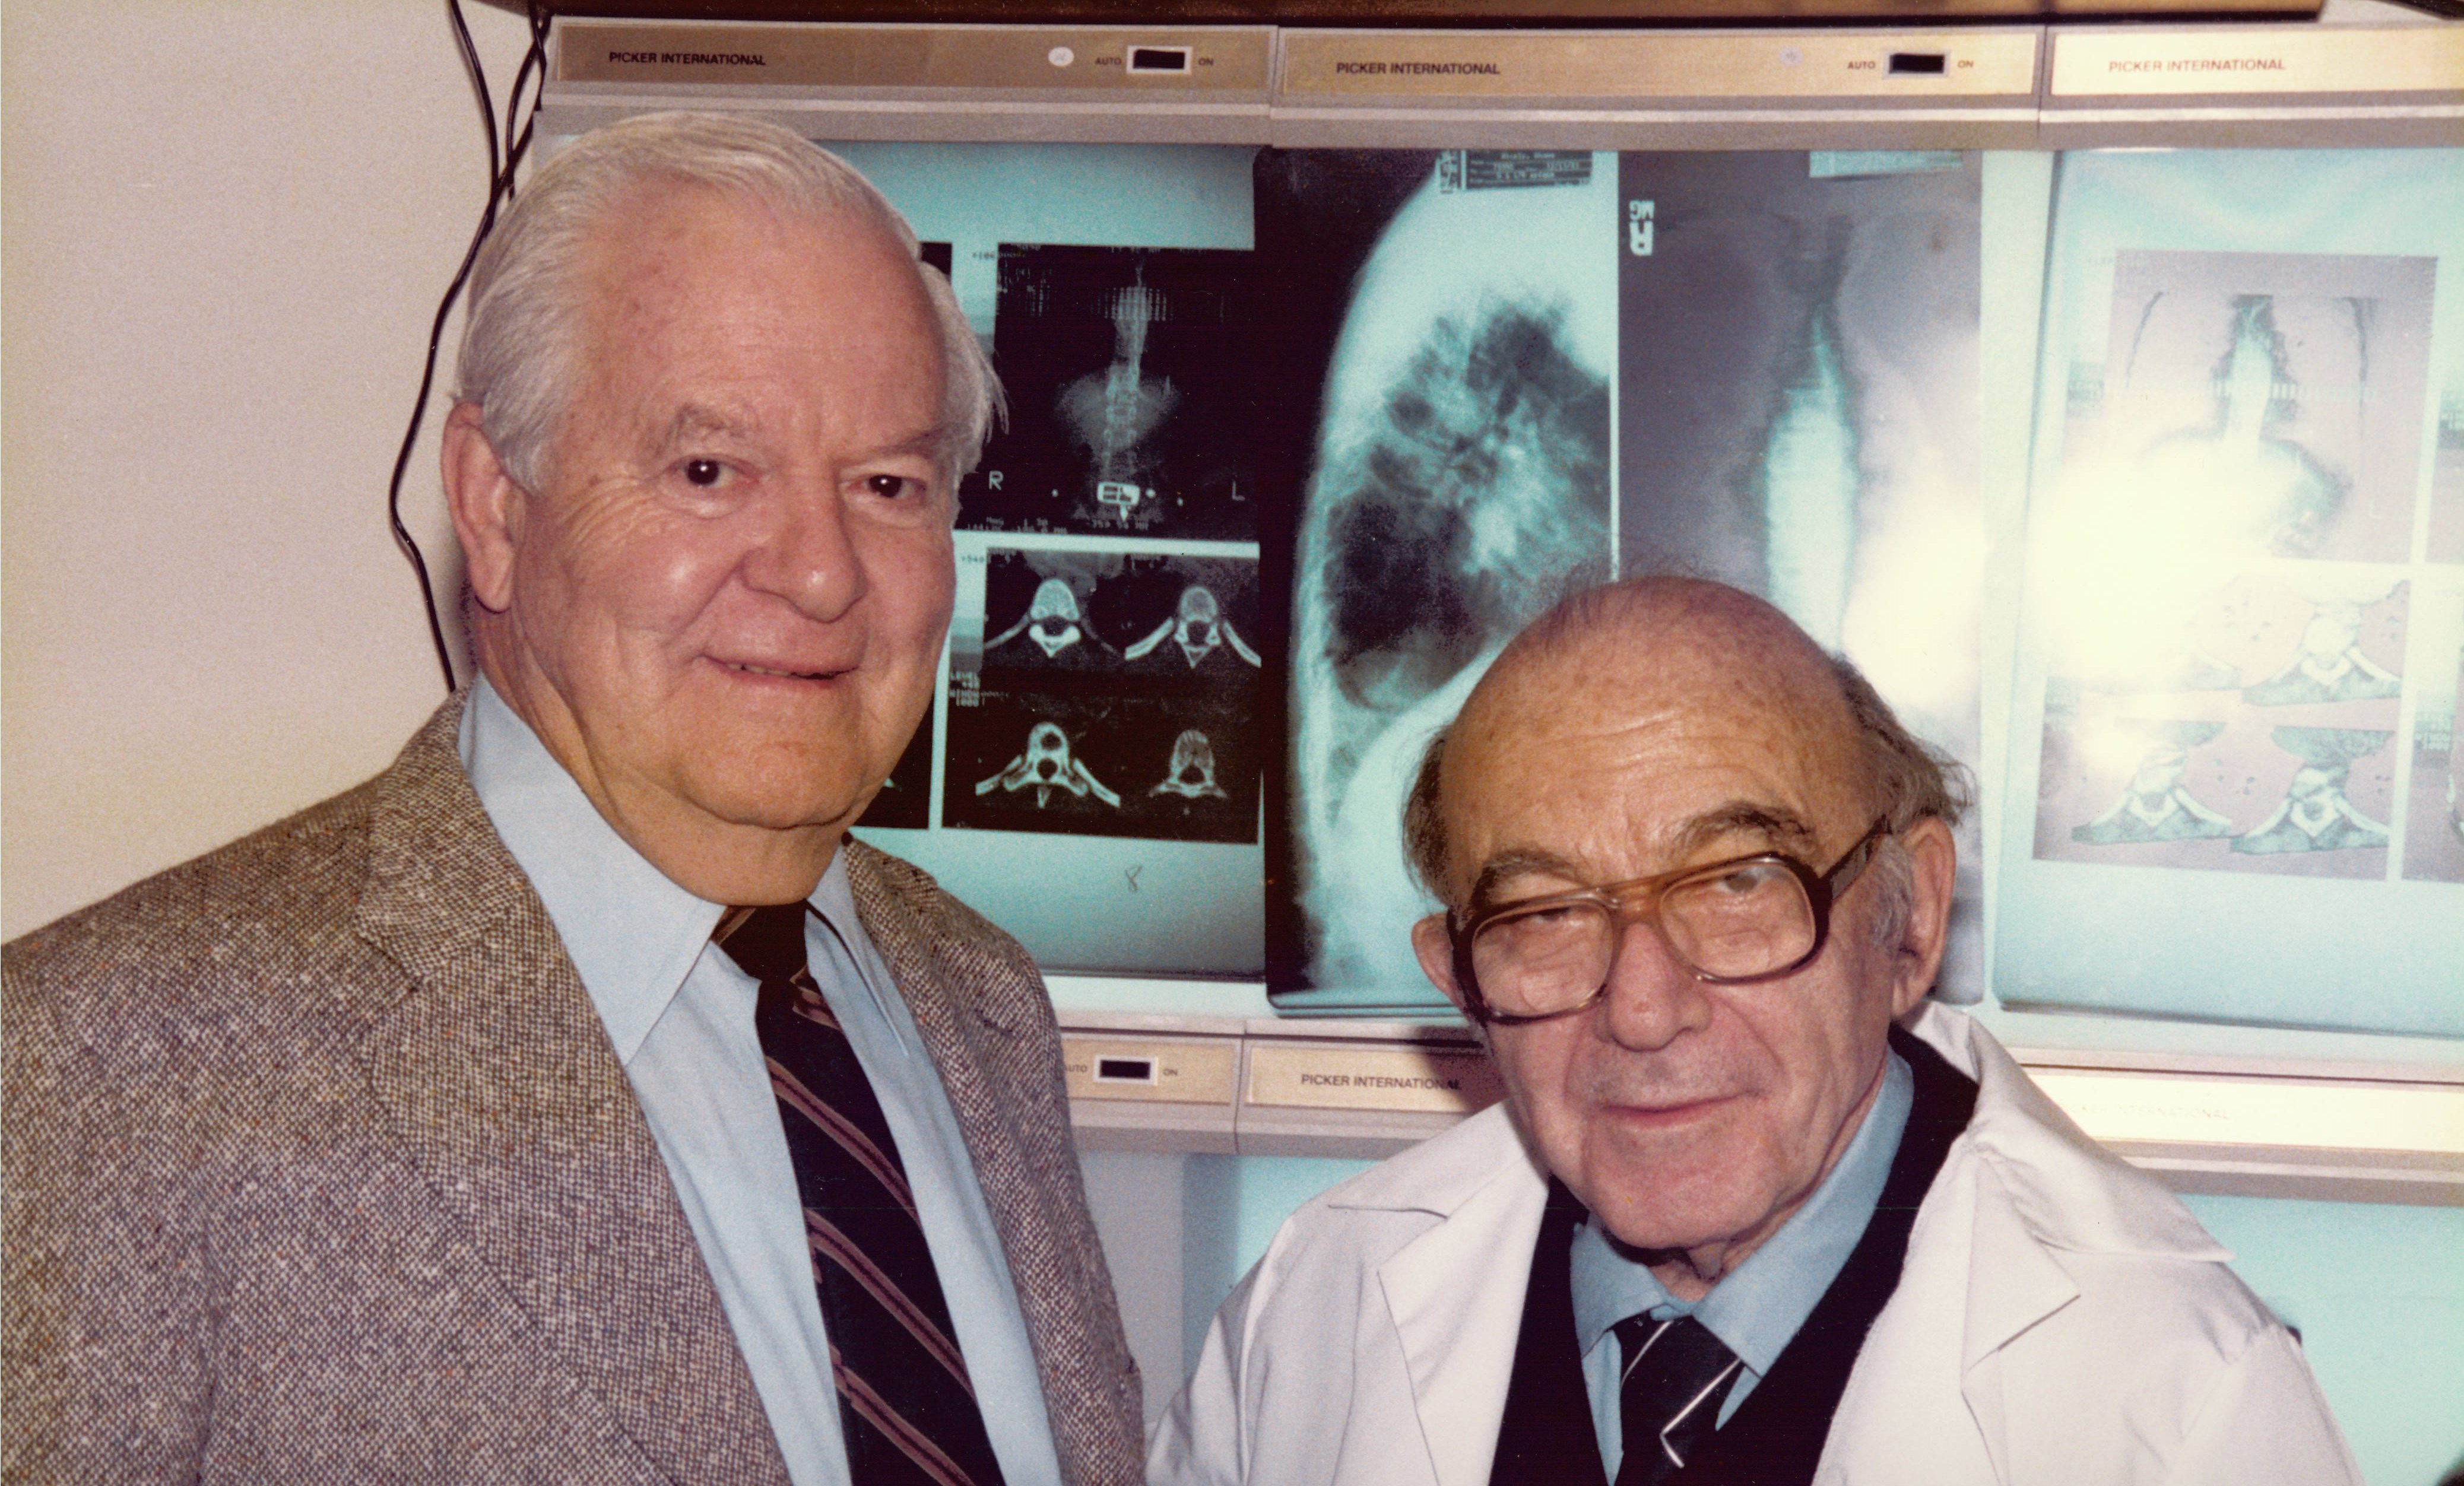 Drs. Felson and Jacobson